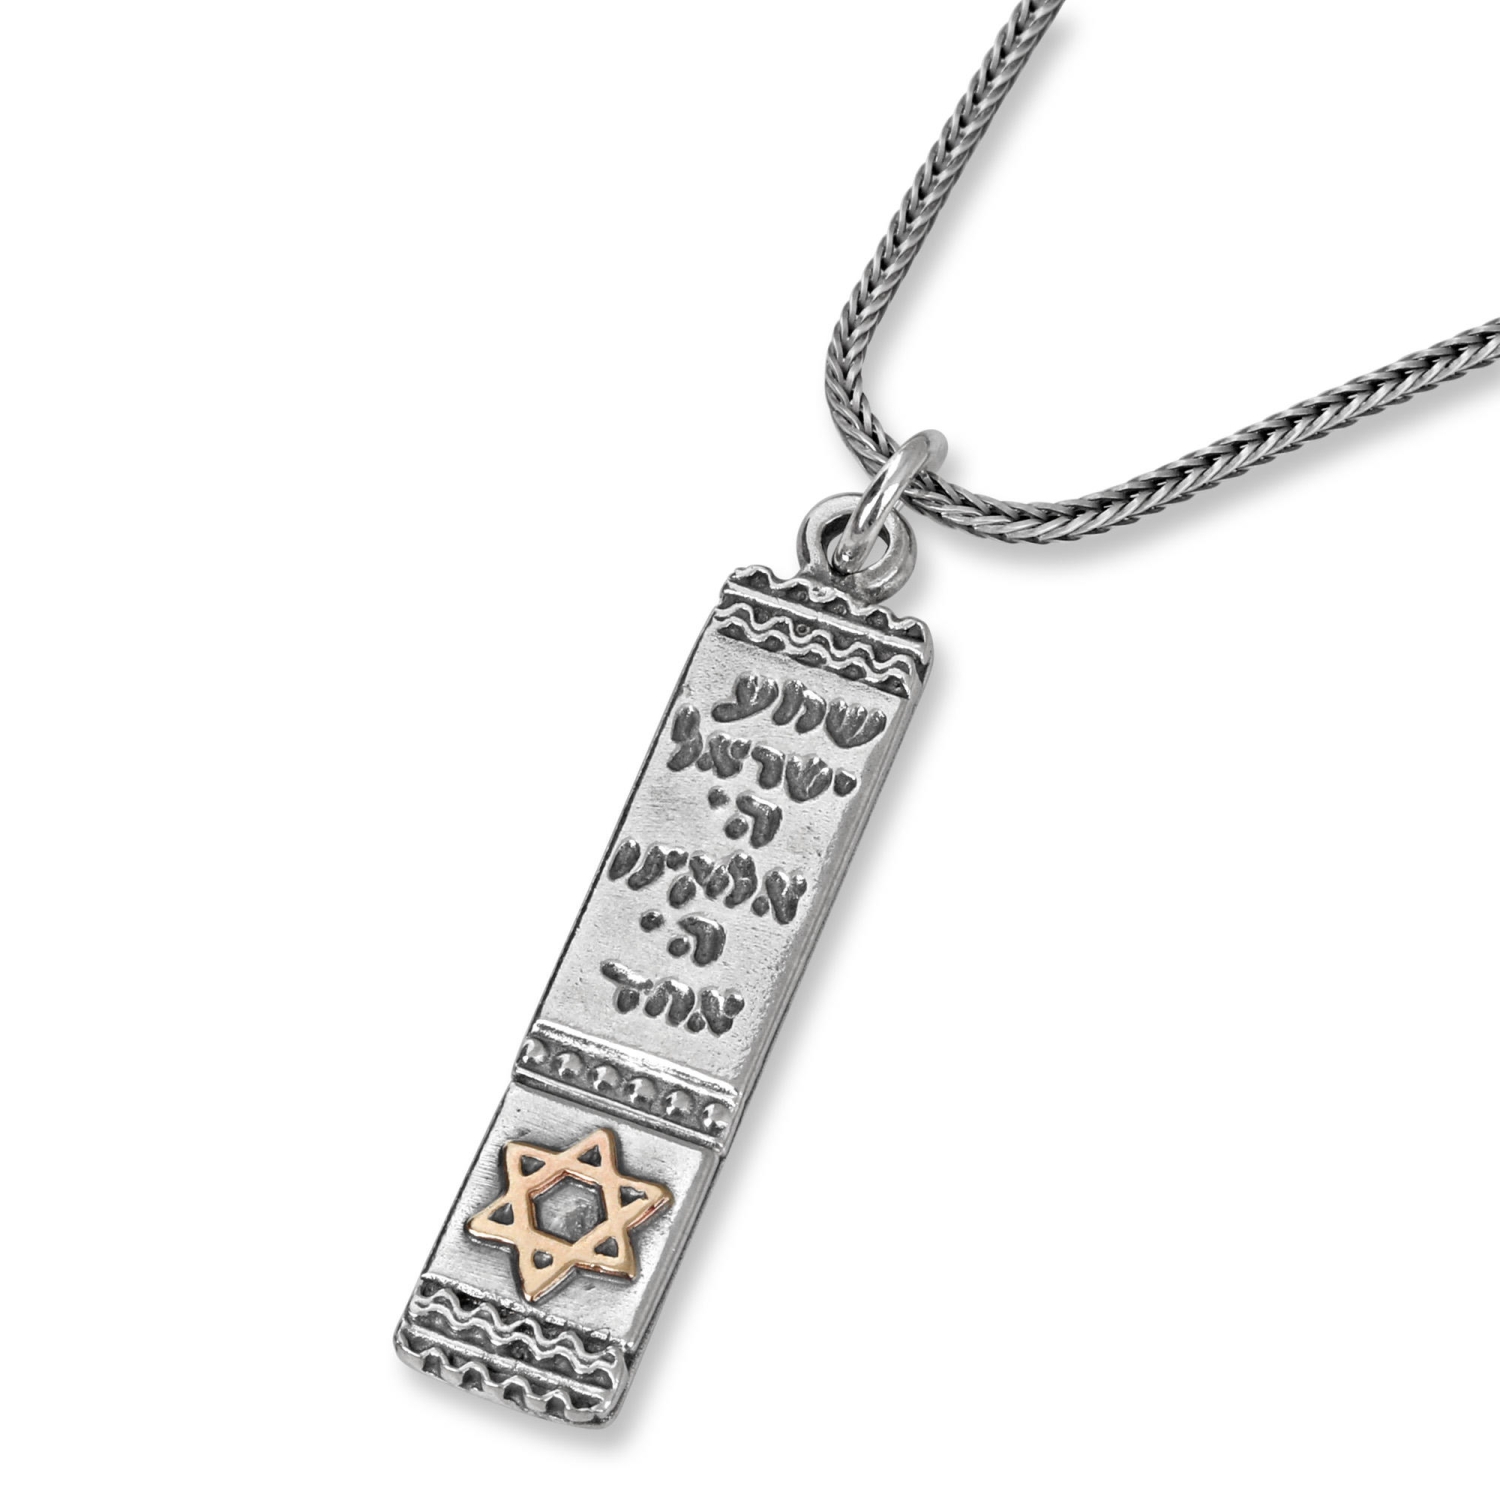 Shema Israel: Silver Pendant Necklace with Gold Star of David - 1